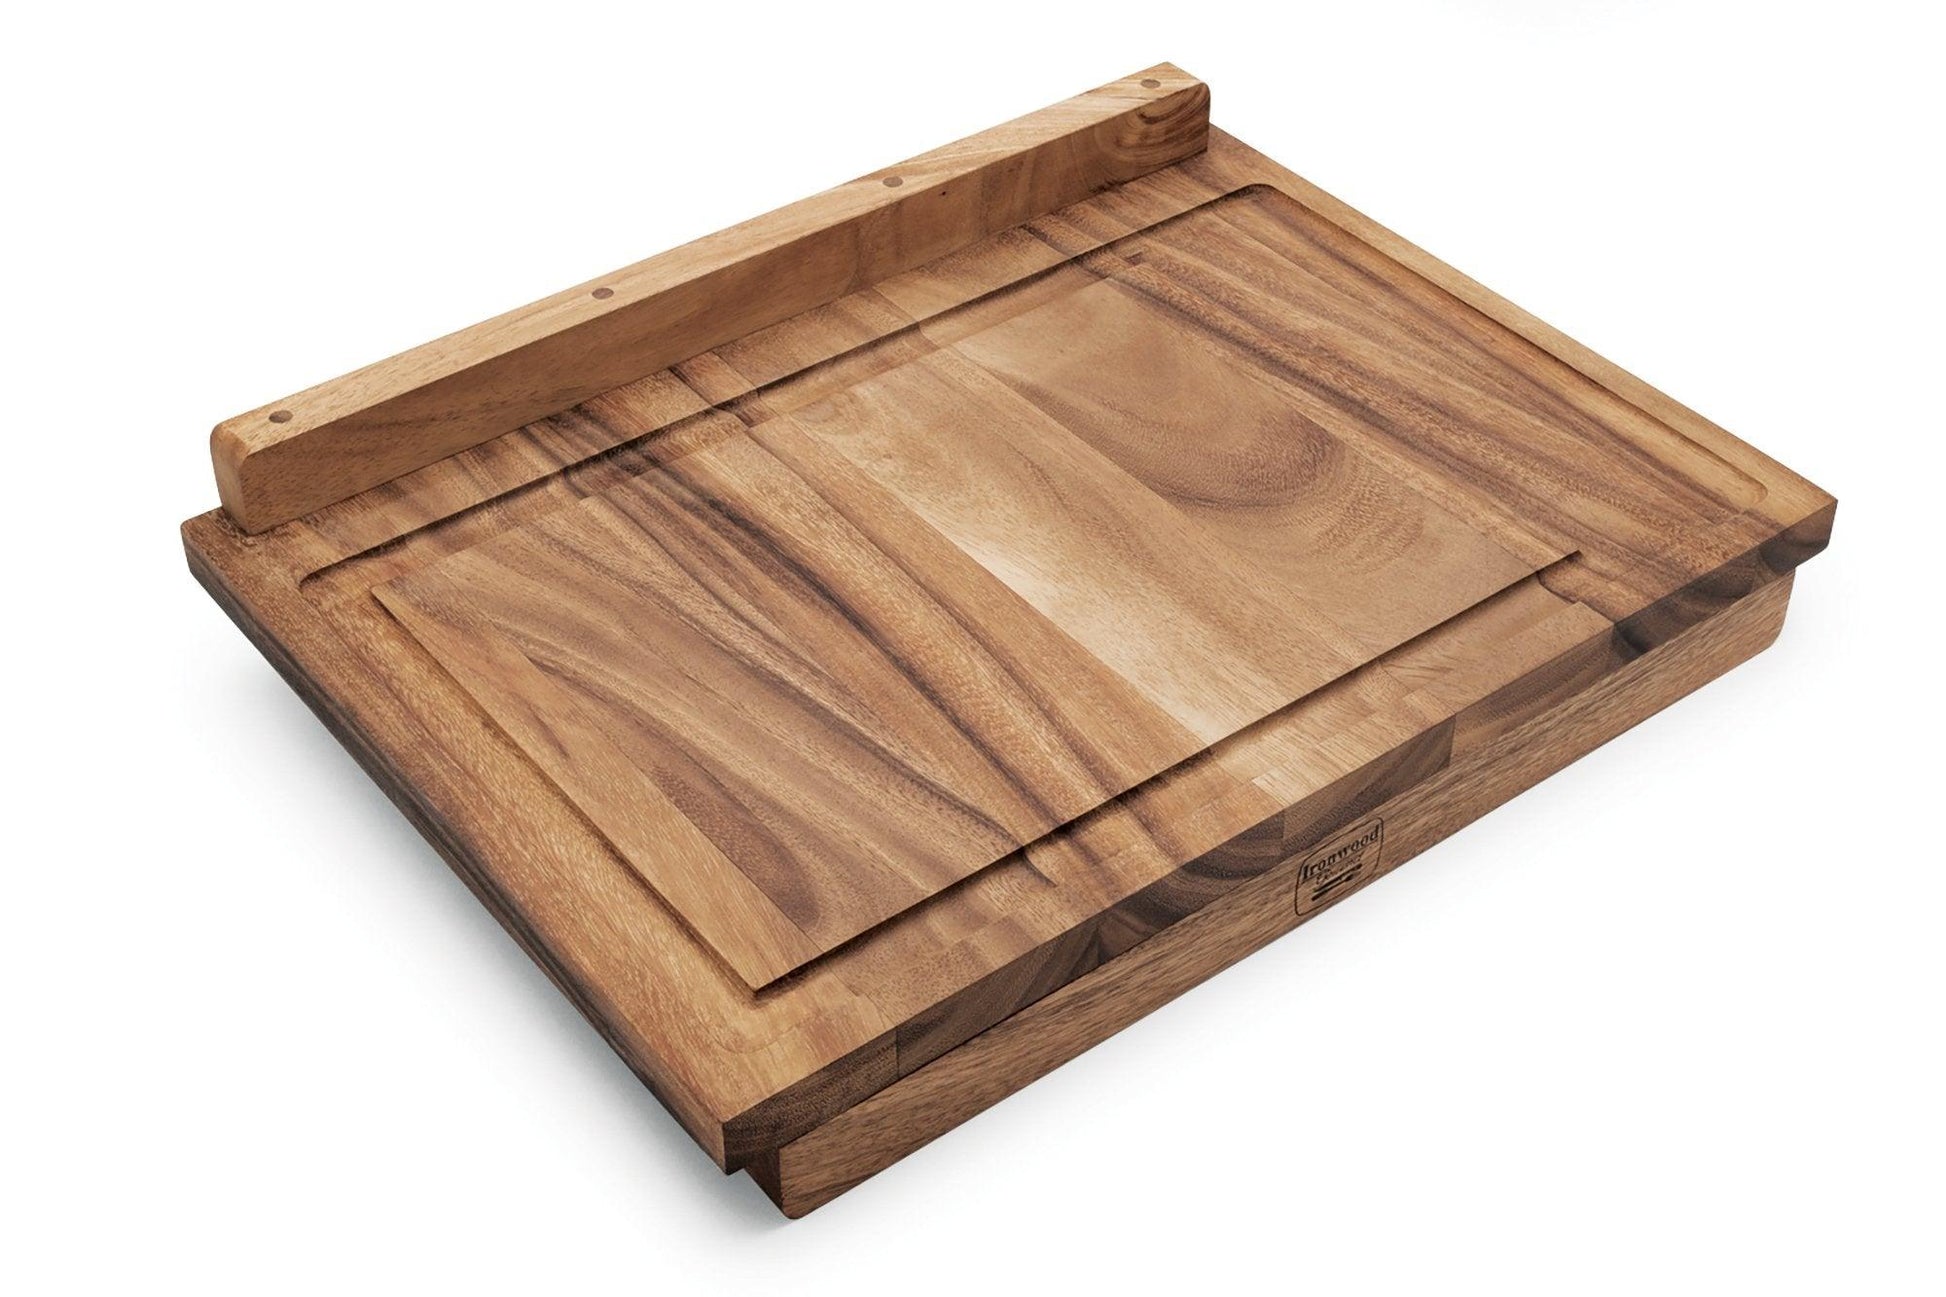 Ironwood Gourmet Double-Sided Countertop Lyon Pastry/Cutting Board With Gravy Groove, Acacia Wood 17.25 x 24 x 1.25 inches - CookCave